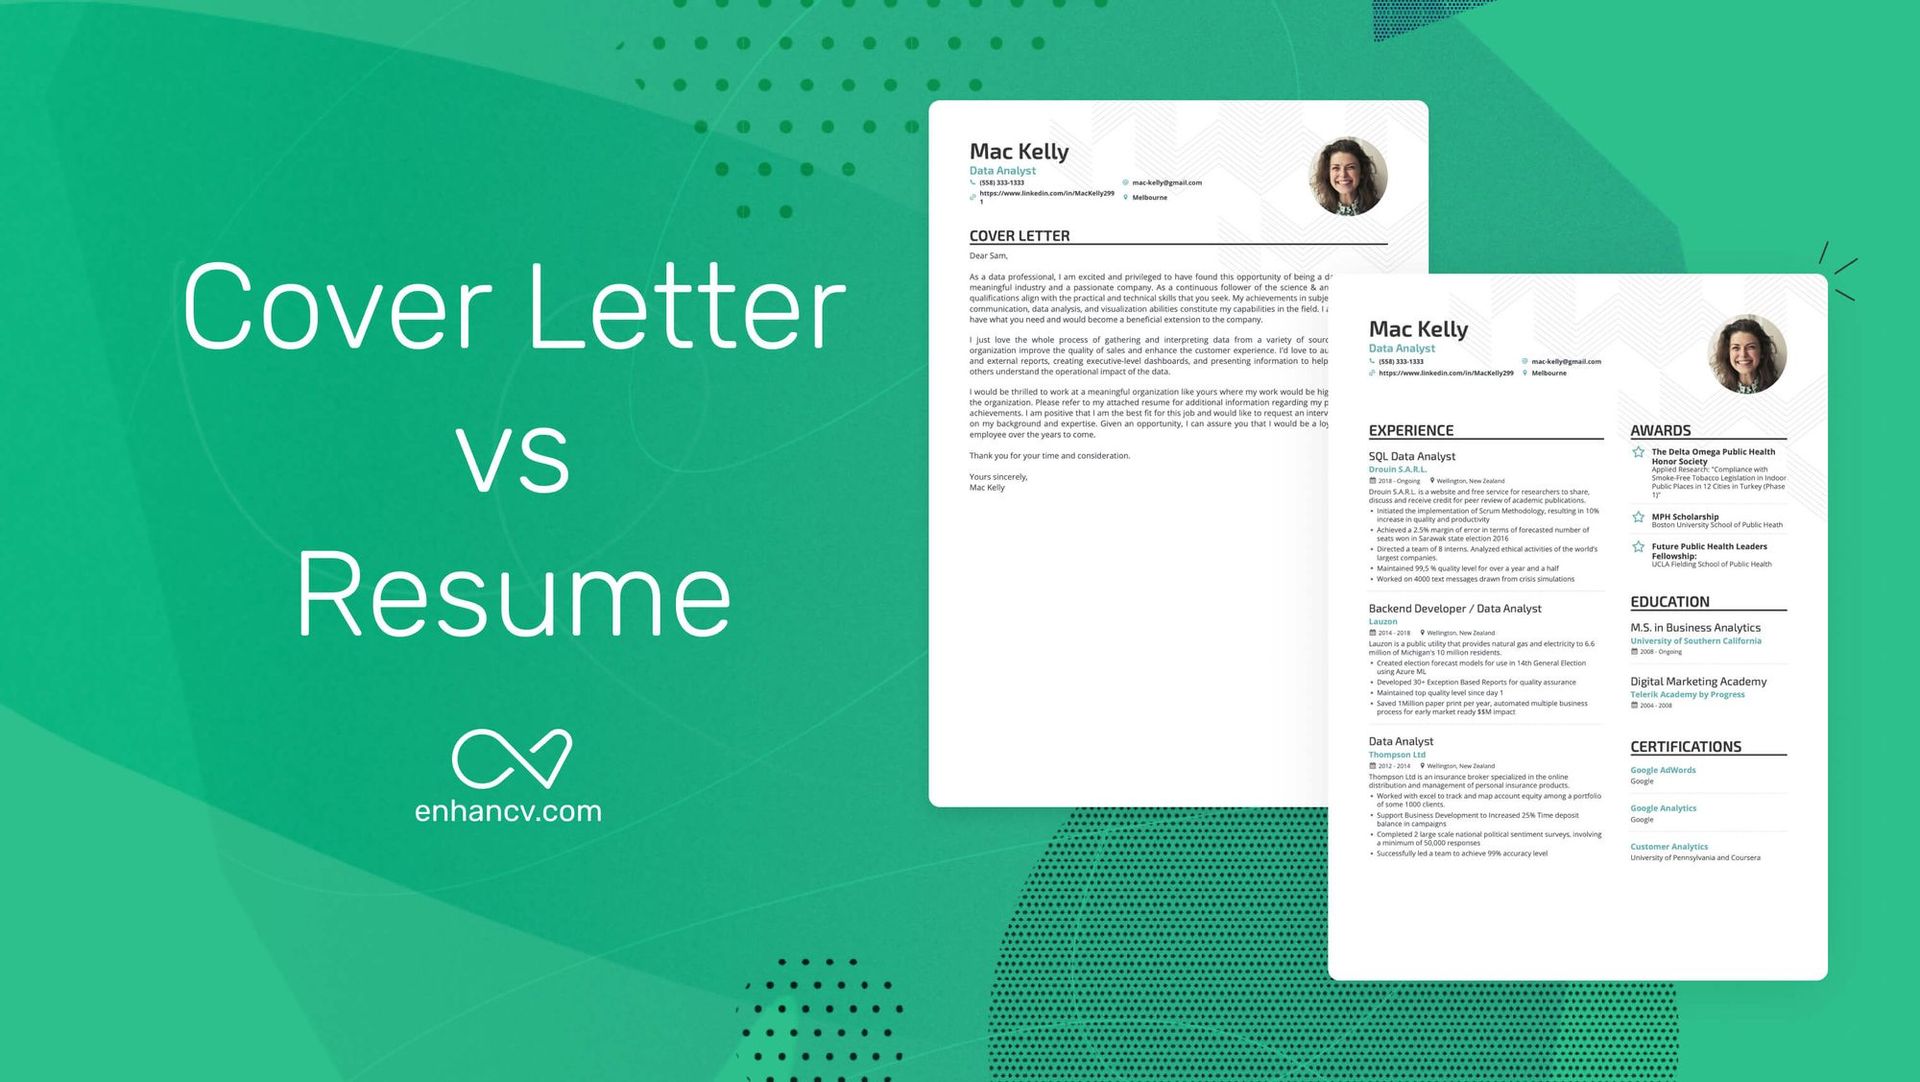 is cover letter the same as resumes